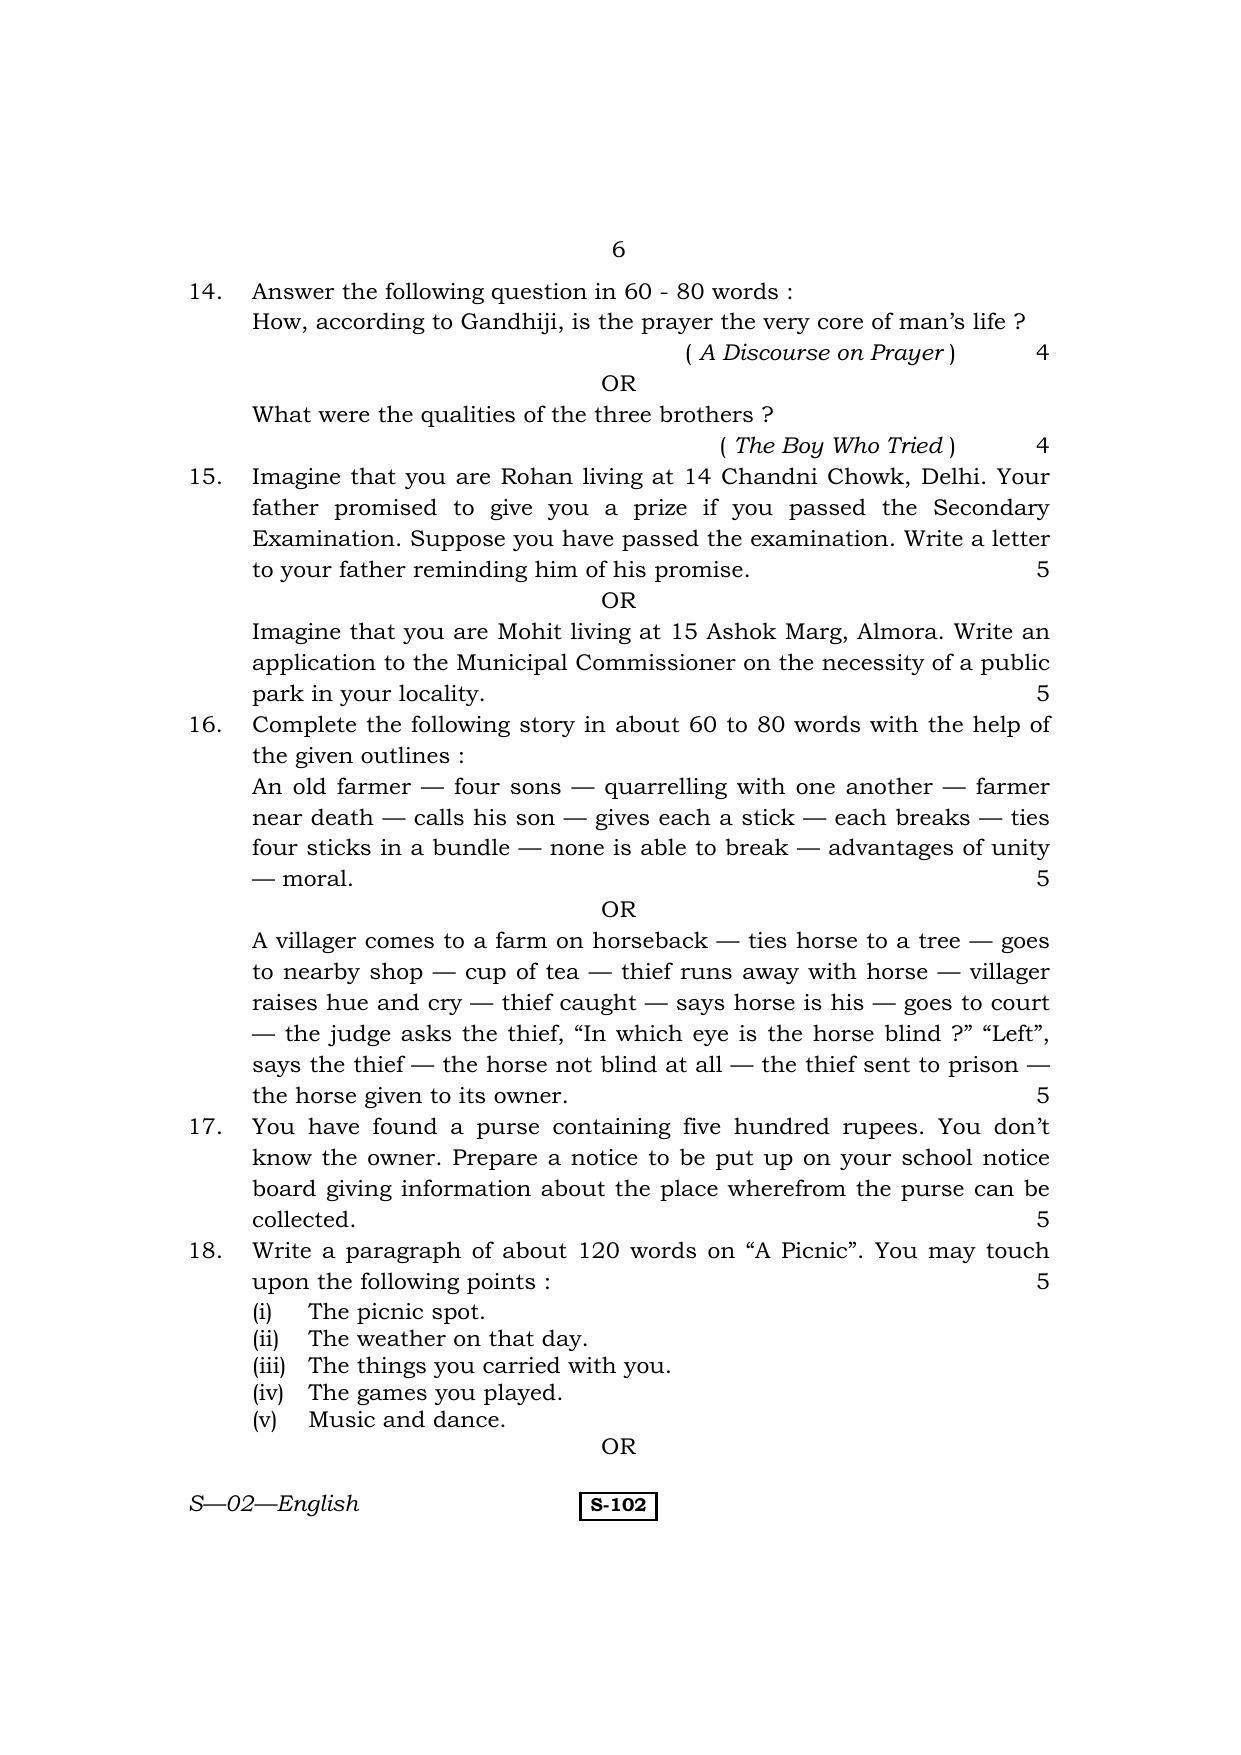 RBSE Class 10 English 2011 Question Paper - Page 6